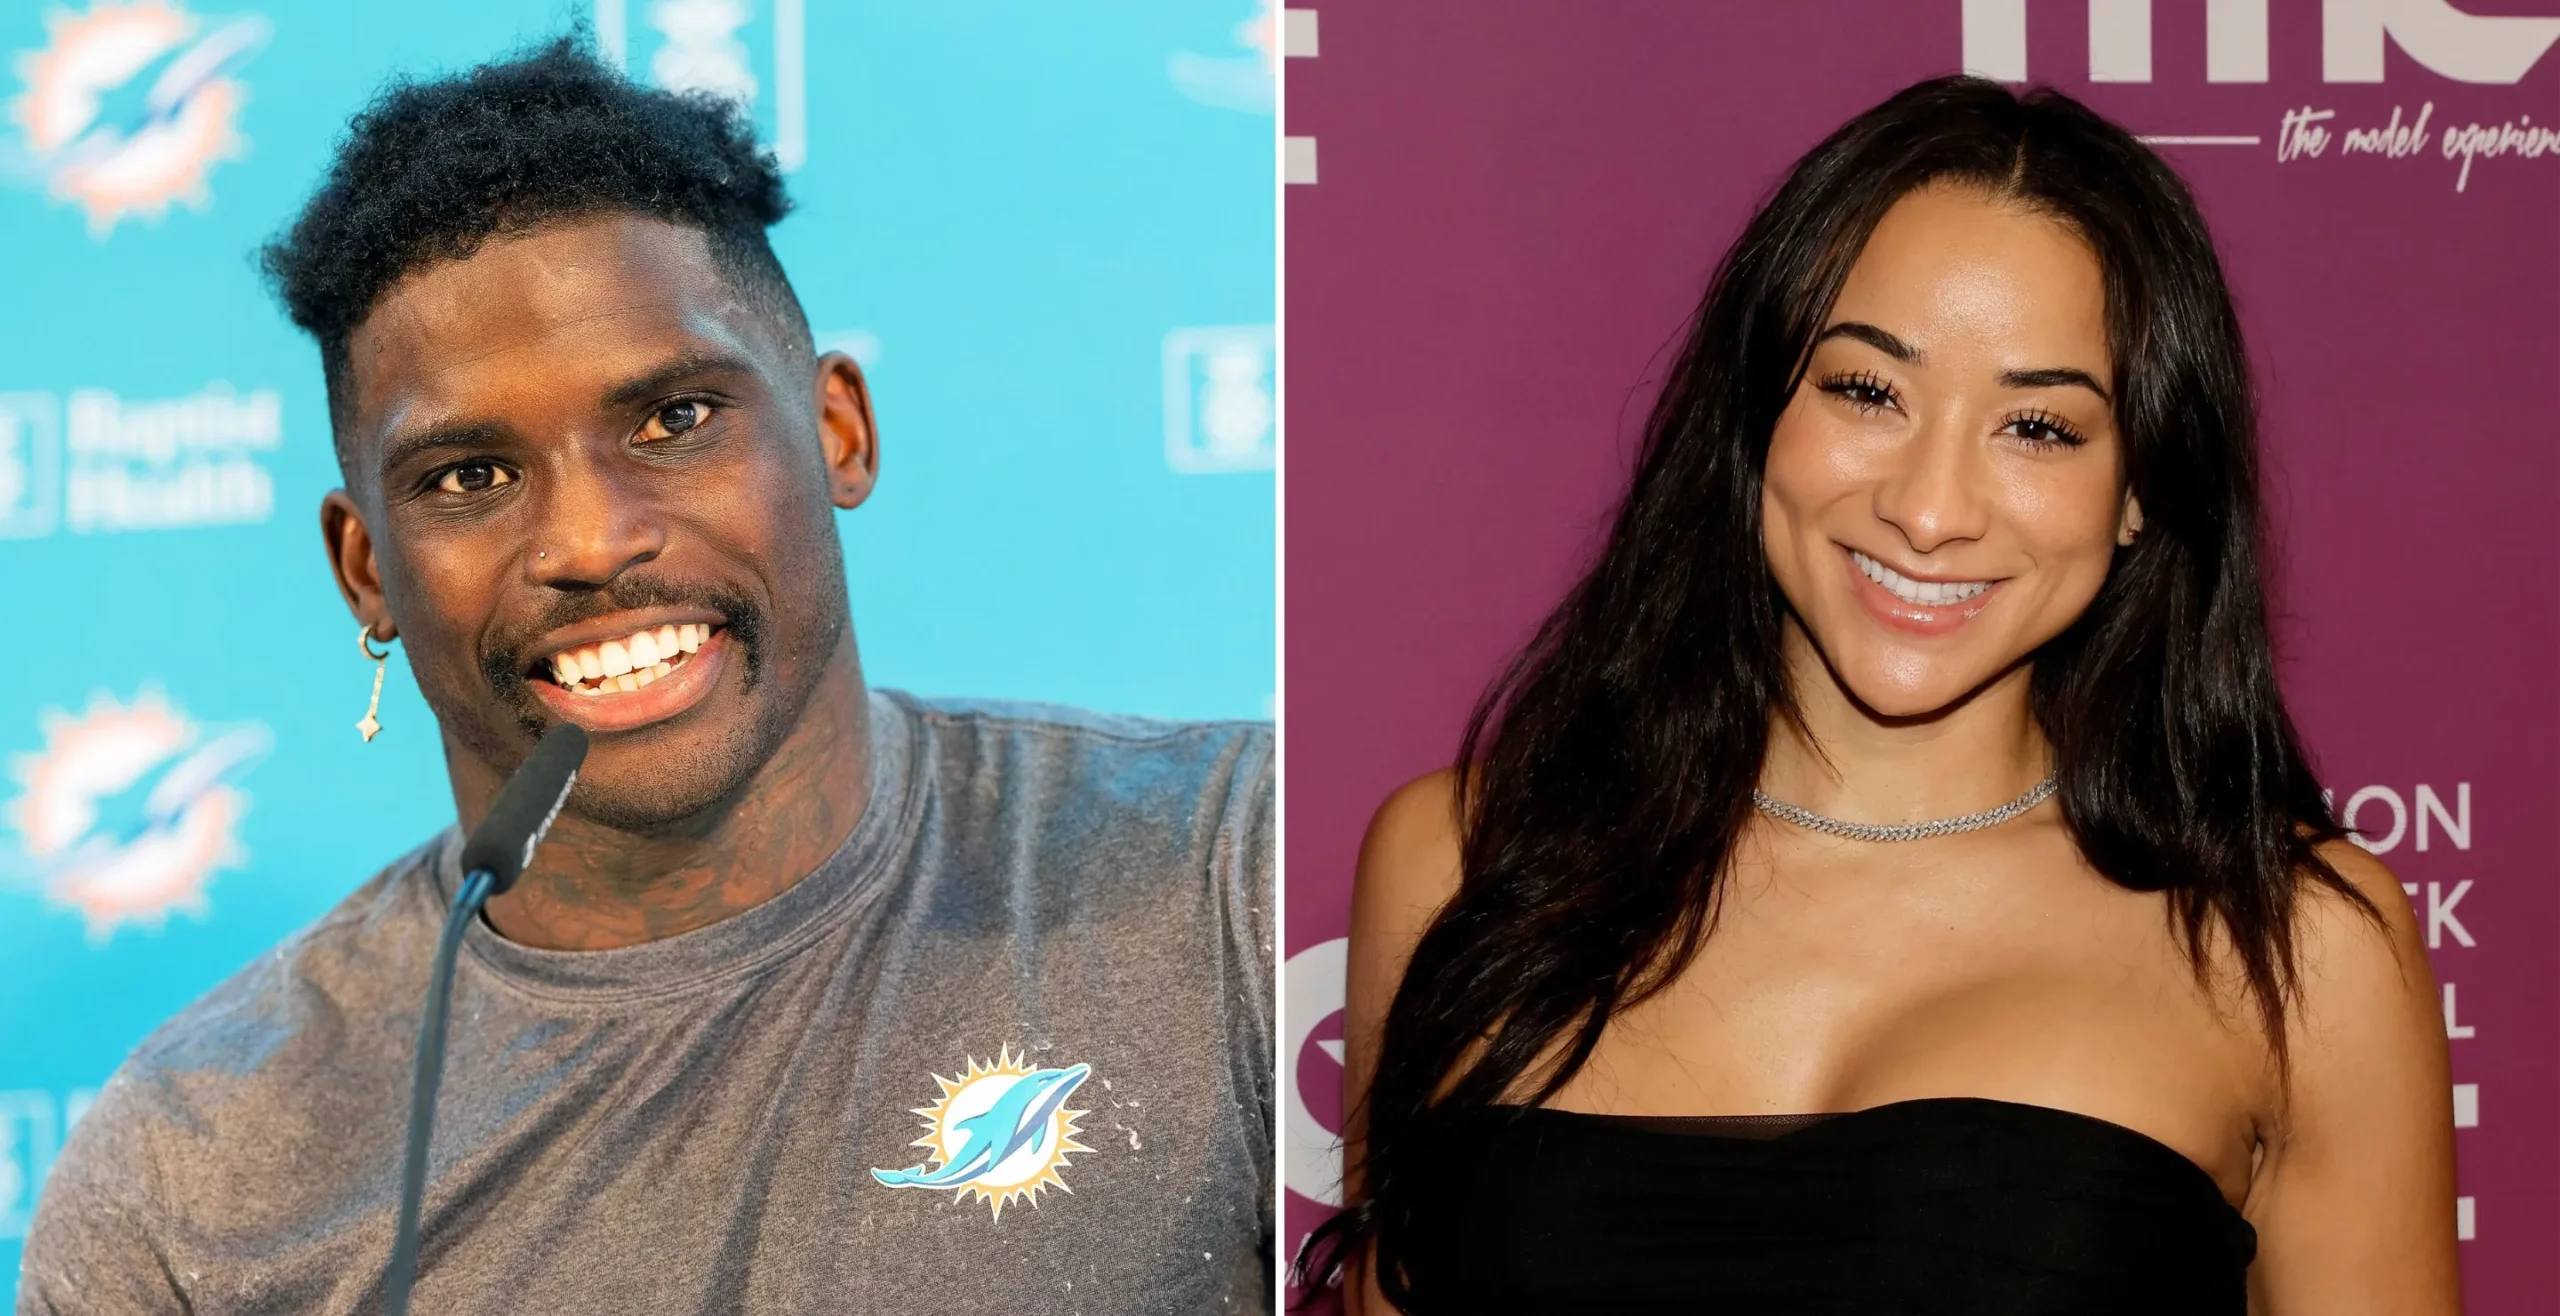 Tyreek Hill’s Wife Has Shared a New Photo Responding To Dolphins Star Facing 2 Paternity Suits From Rumored Baby Mamas (PIC)